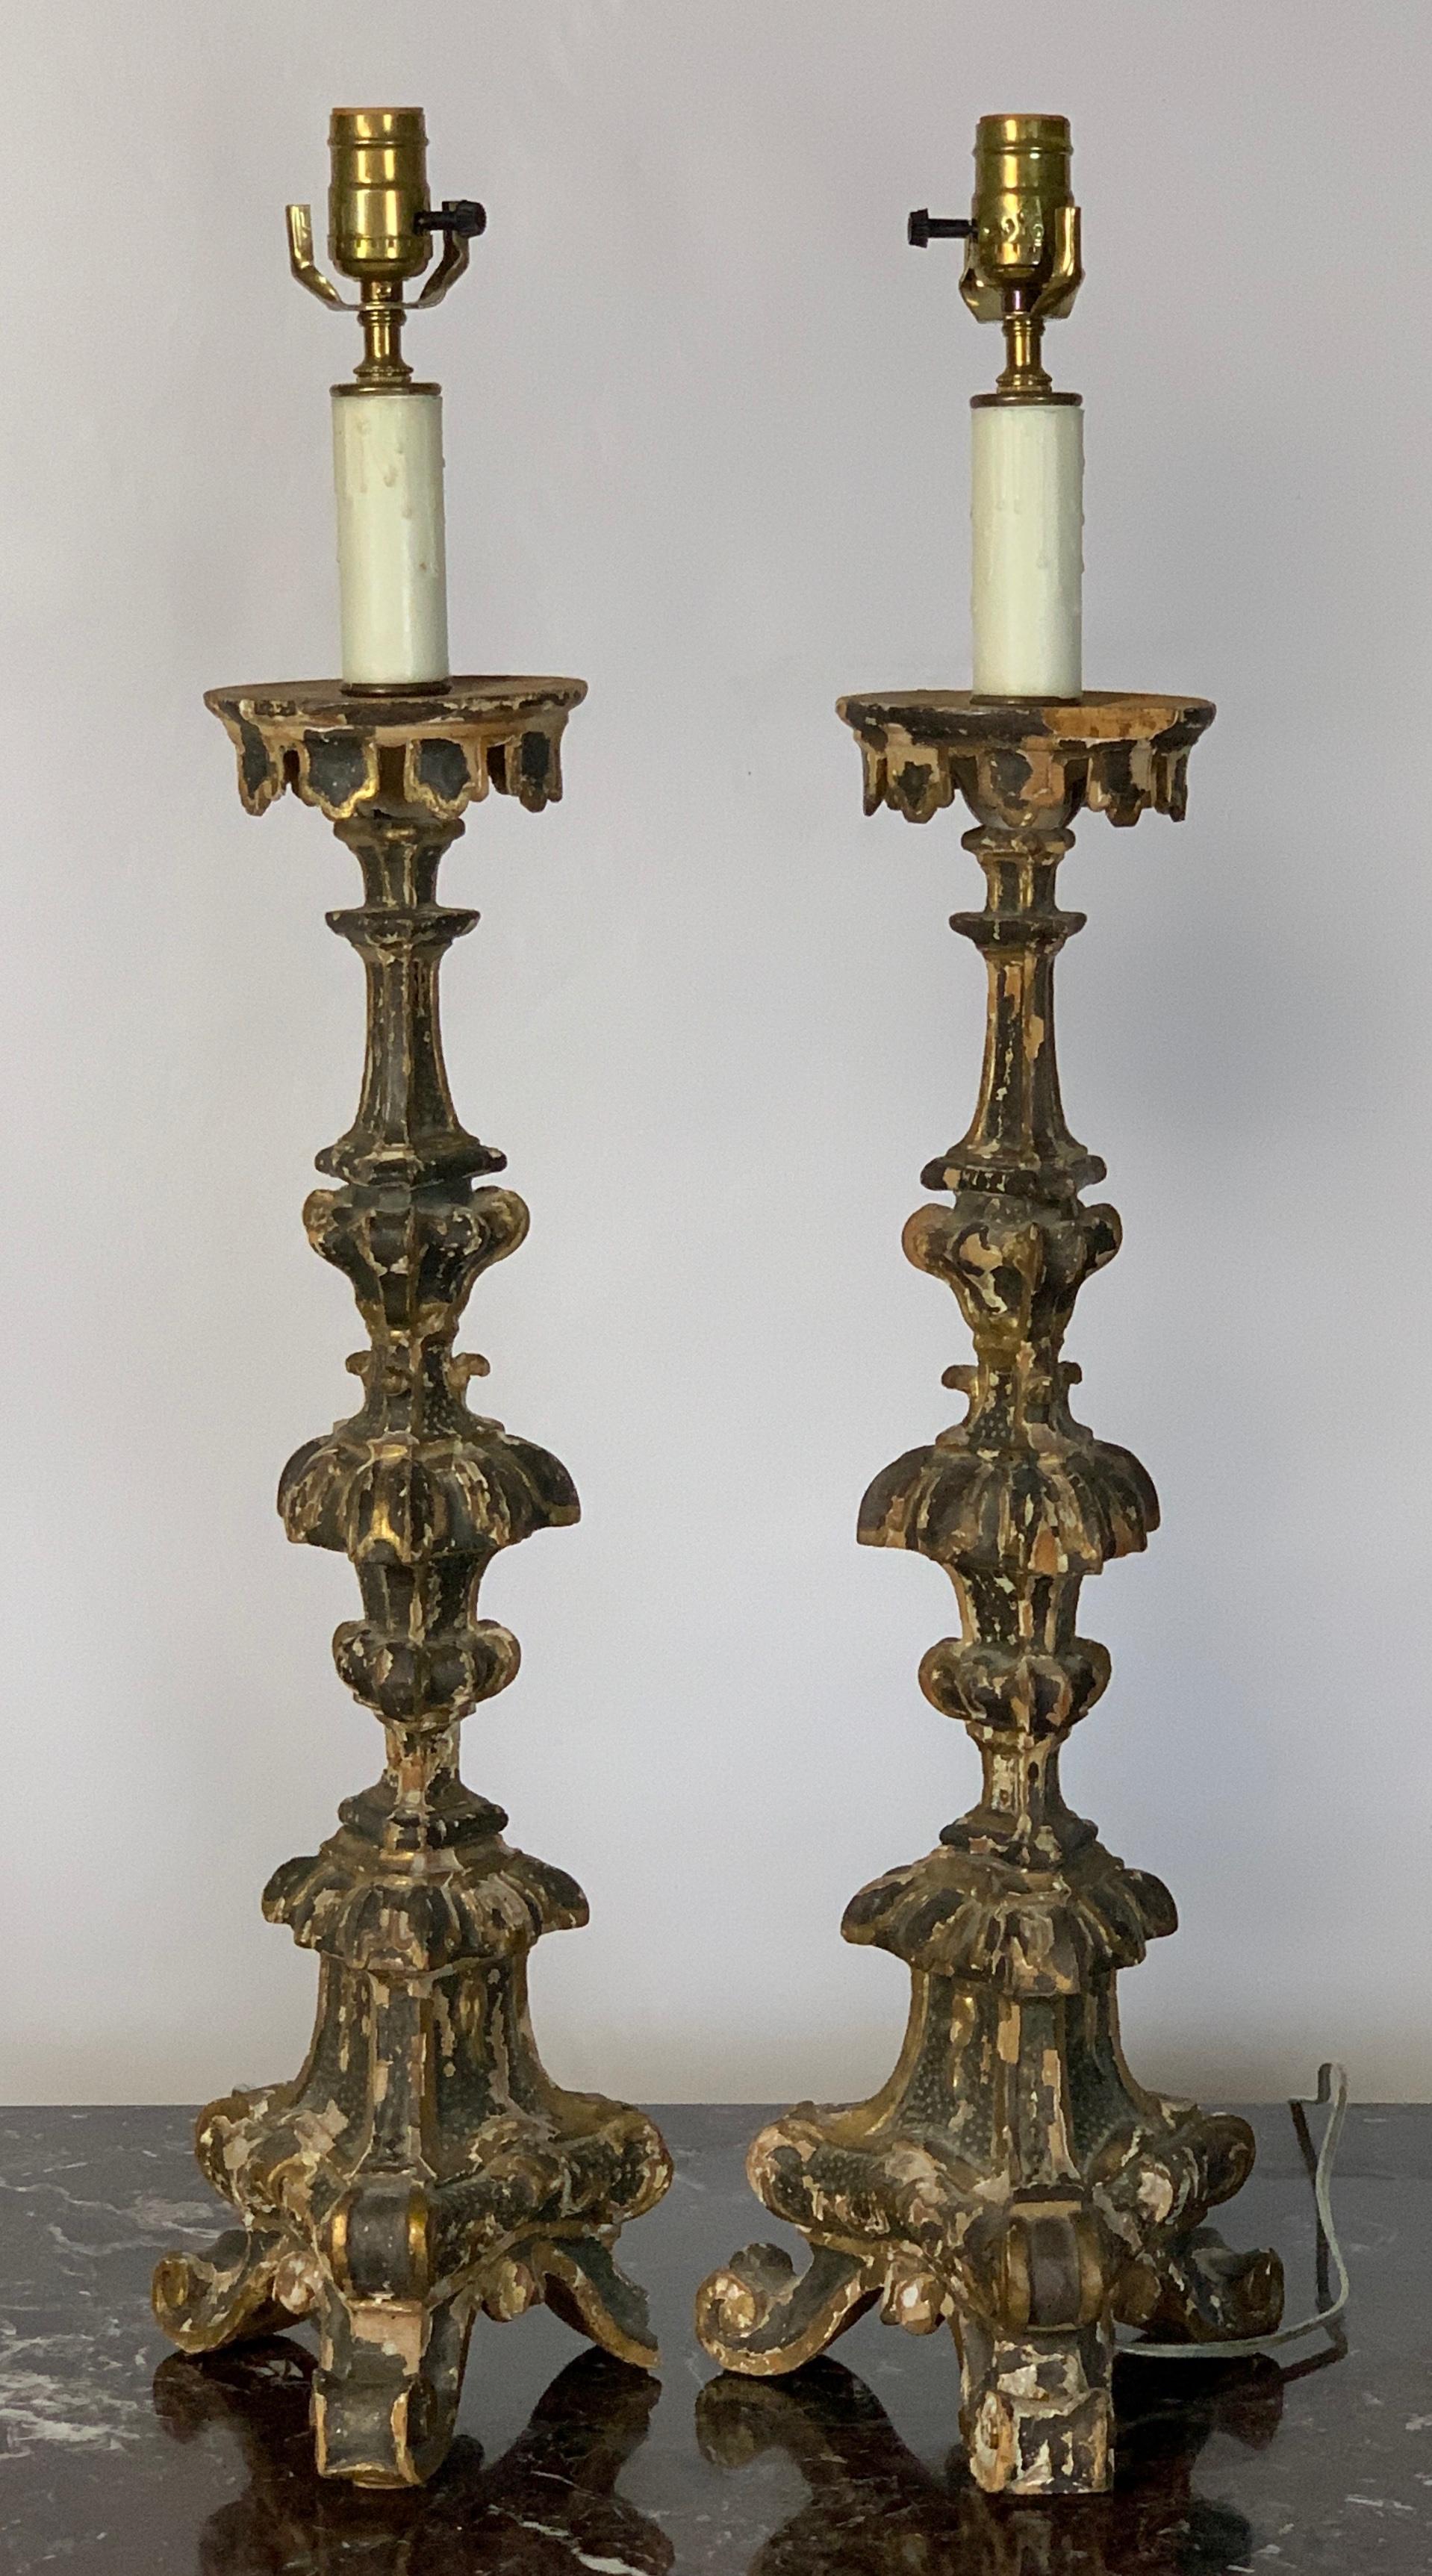 A fine pair of elaborately carved, painted and gilded 18th century Italian pricket candlesticks fashioned into table lamps.